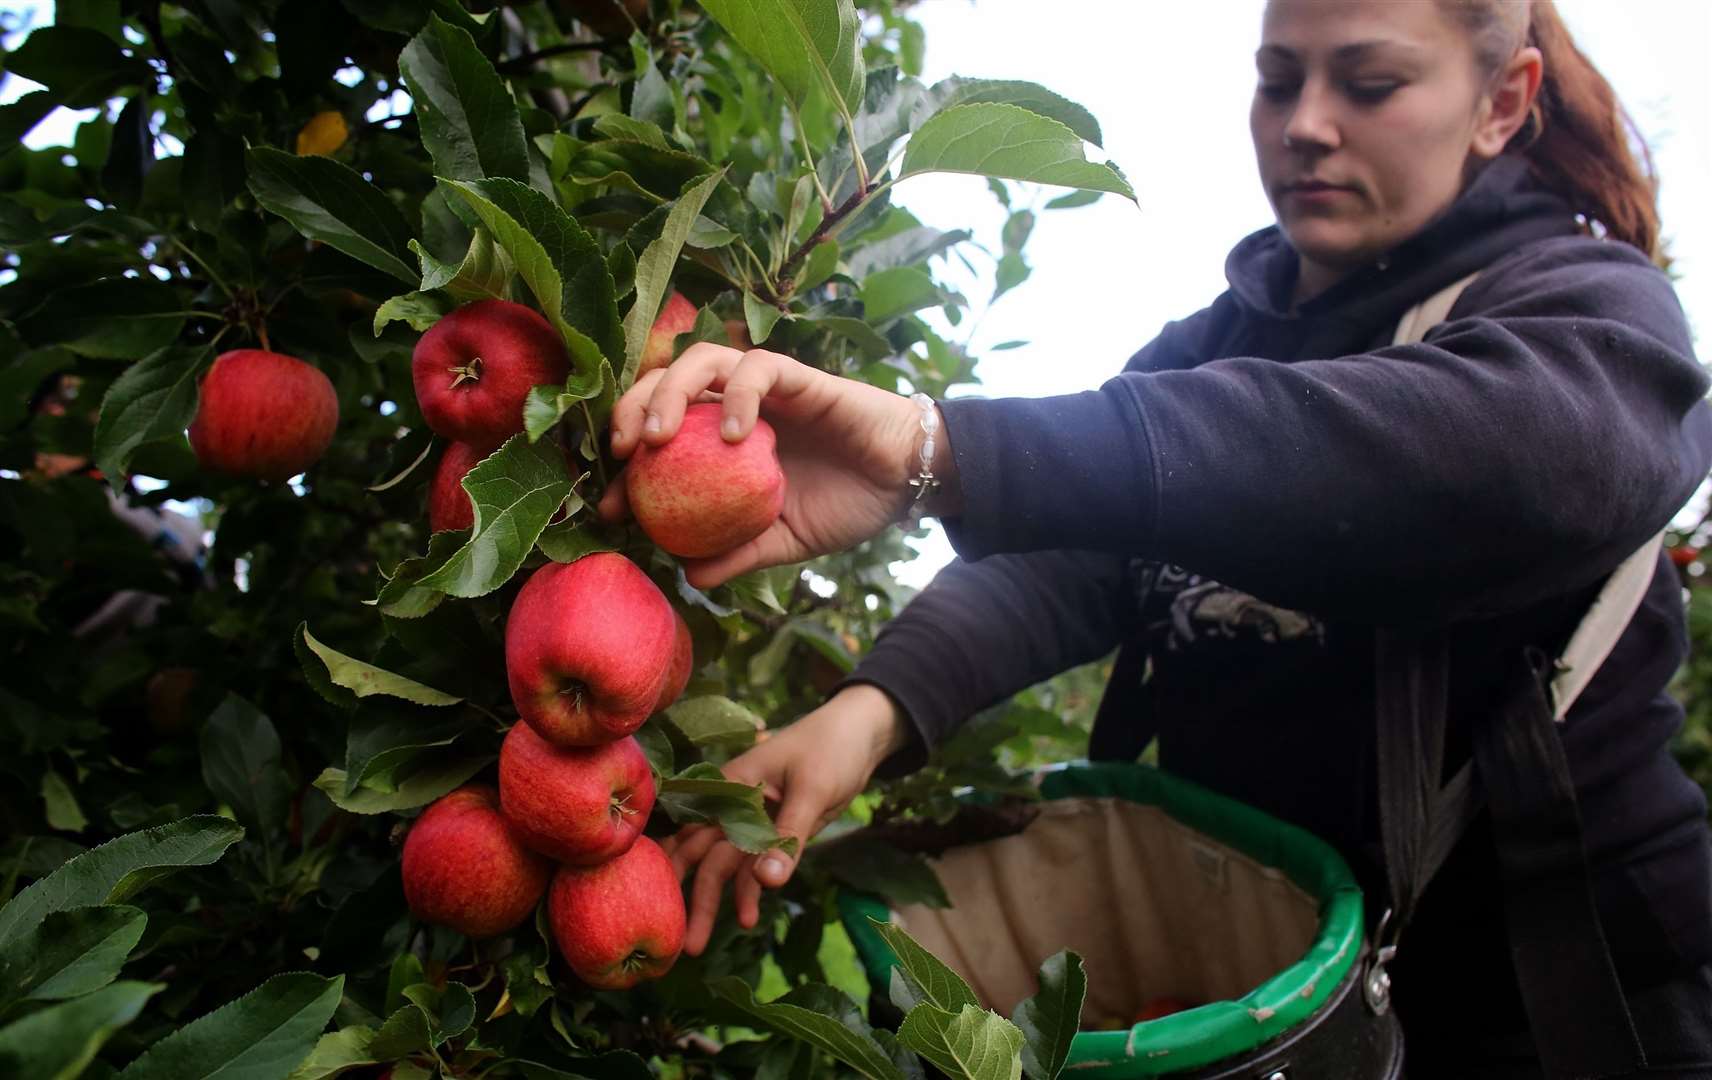 Growers across the county are recruiting fruit pickers now